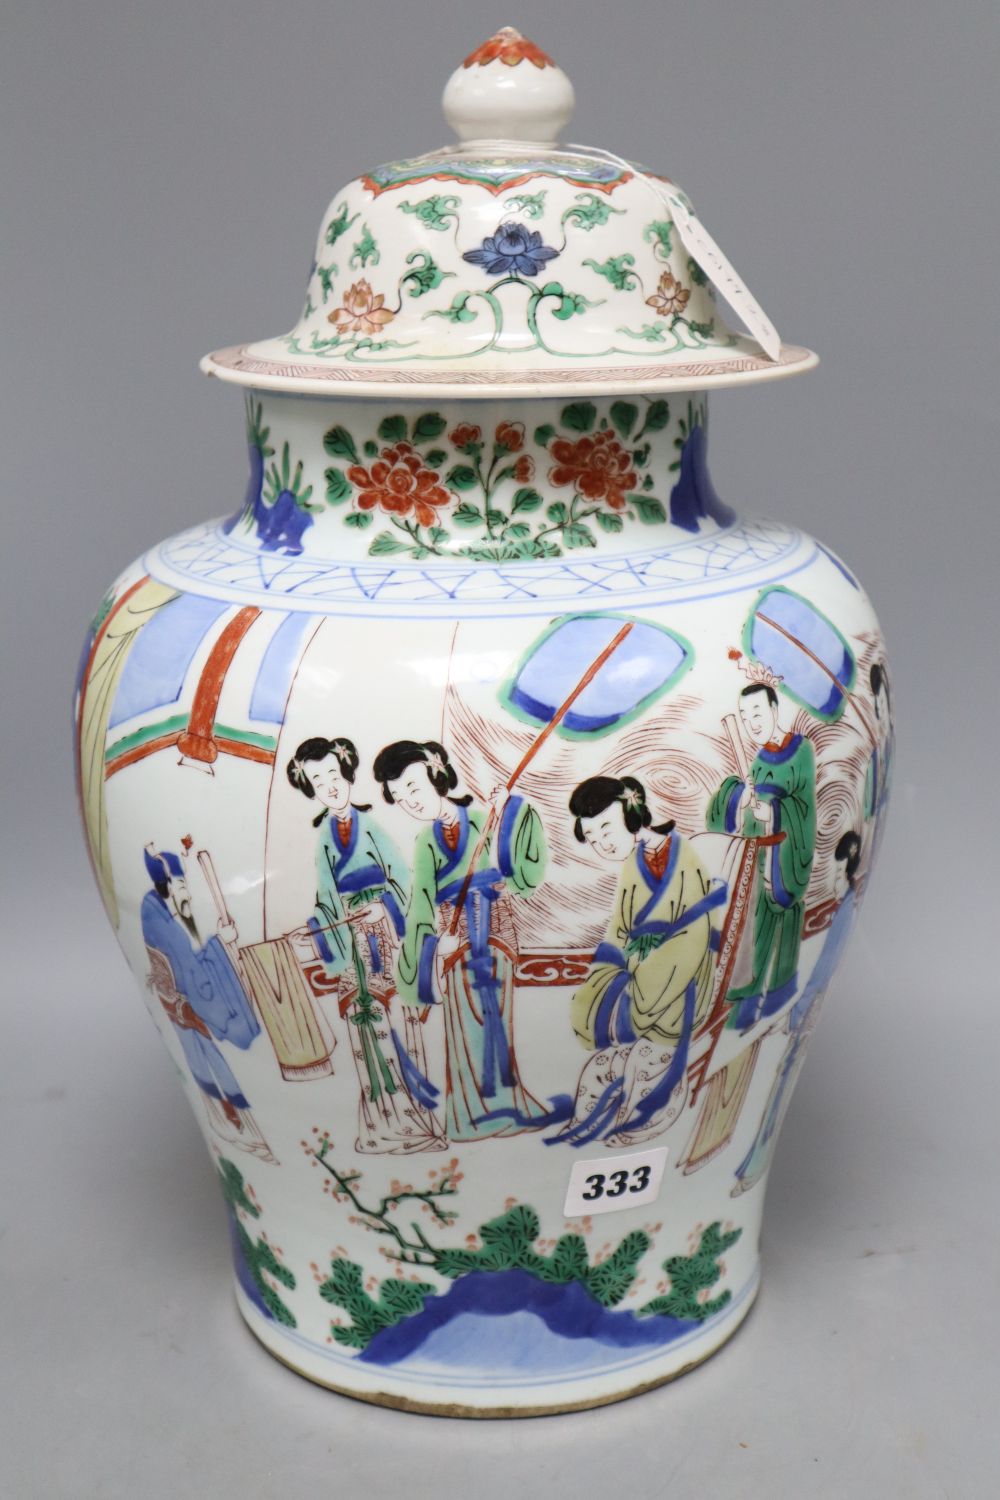 A Chinese Wucai jar and associated cover, height excluding cover 32cm